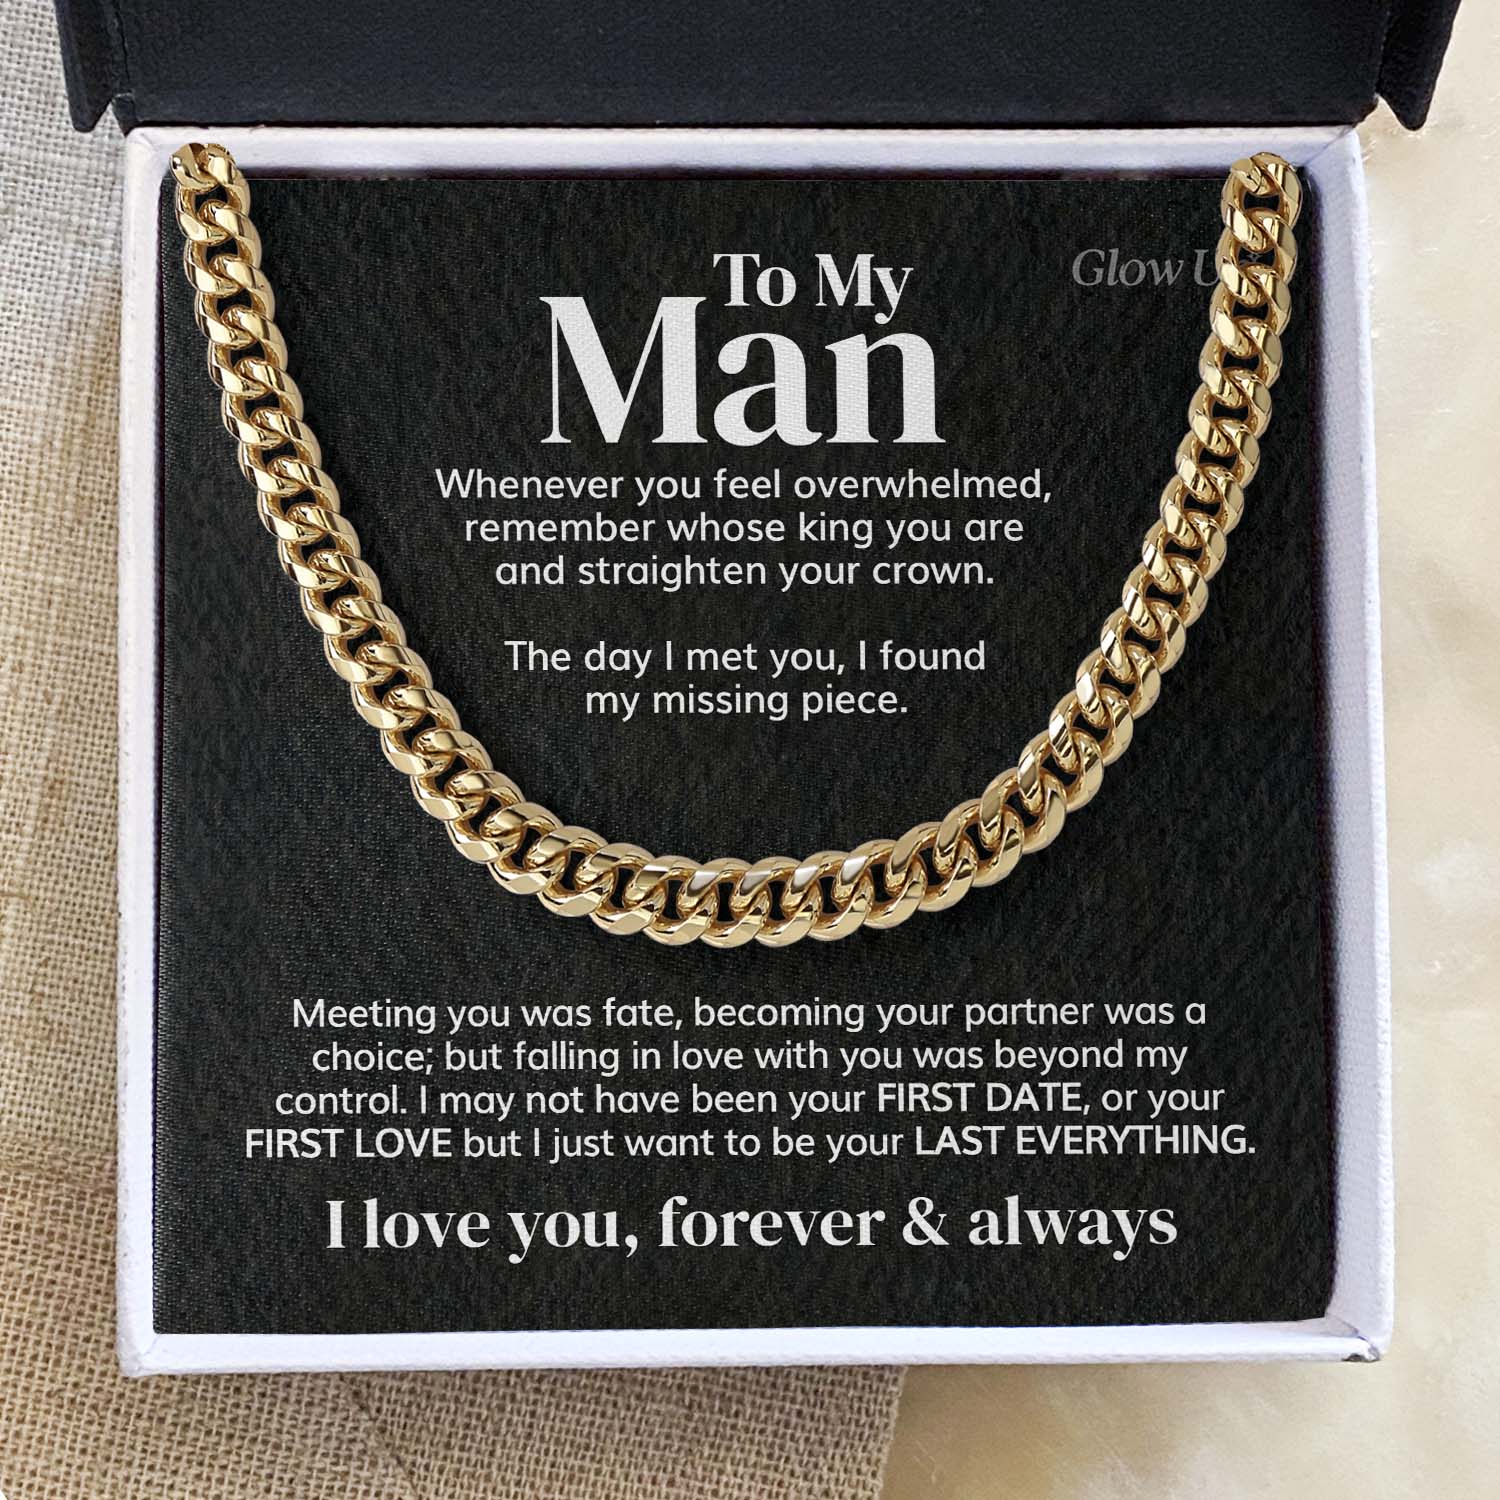 ShineOn Fulfillment Jewelry 14K Yellow Gold Finish / Standard Box To my Man - Remember whose king you are - Cuban Link Chain